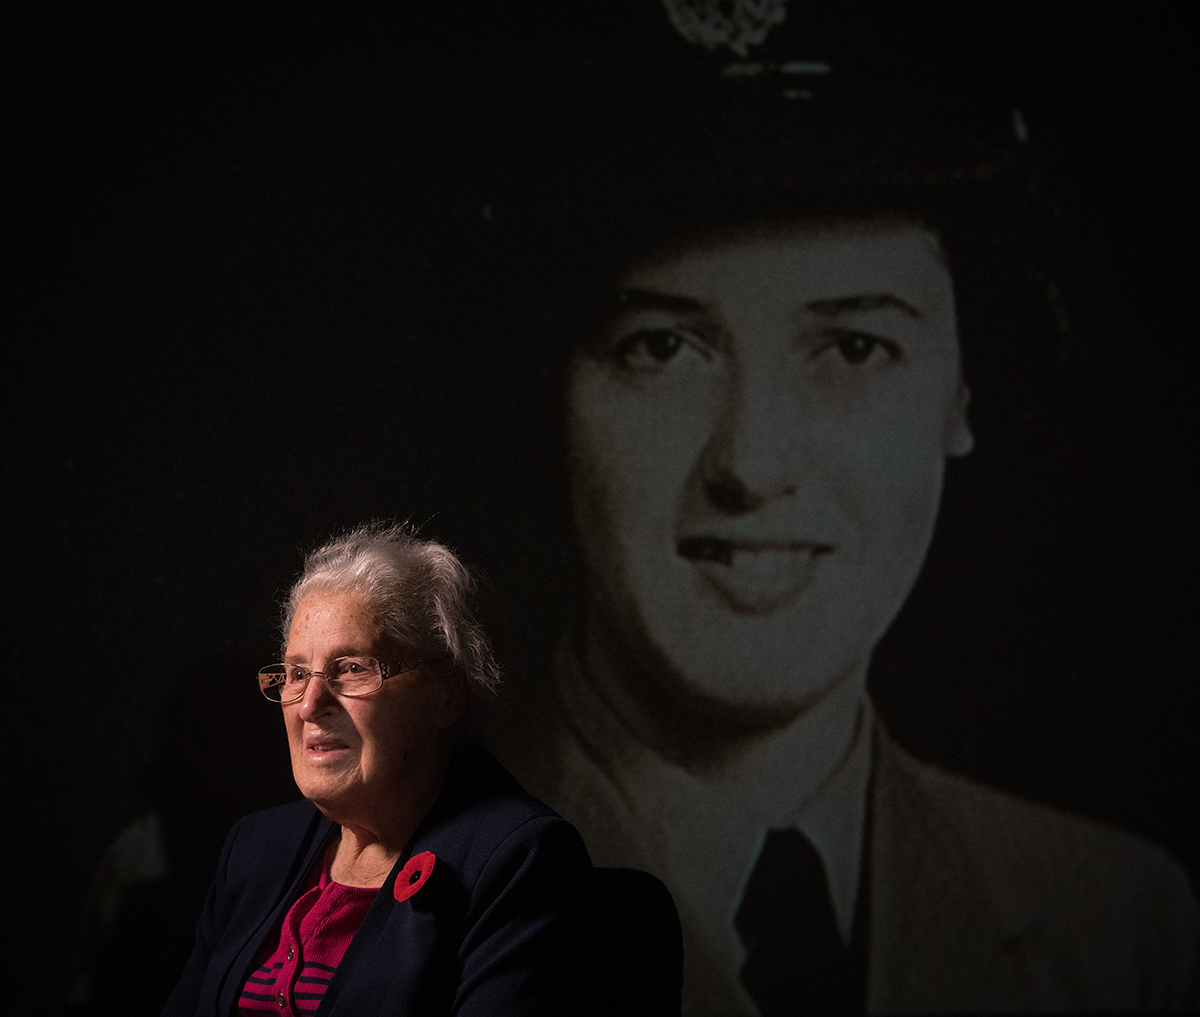 Isobel Montgomery, sits in front of a projected image of herself during the war times